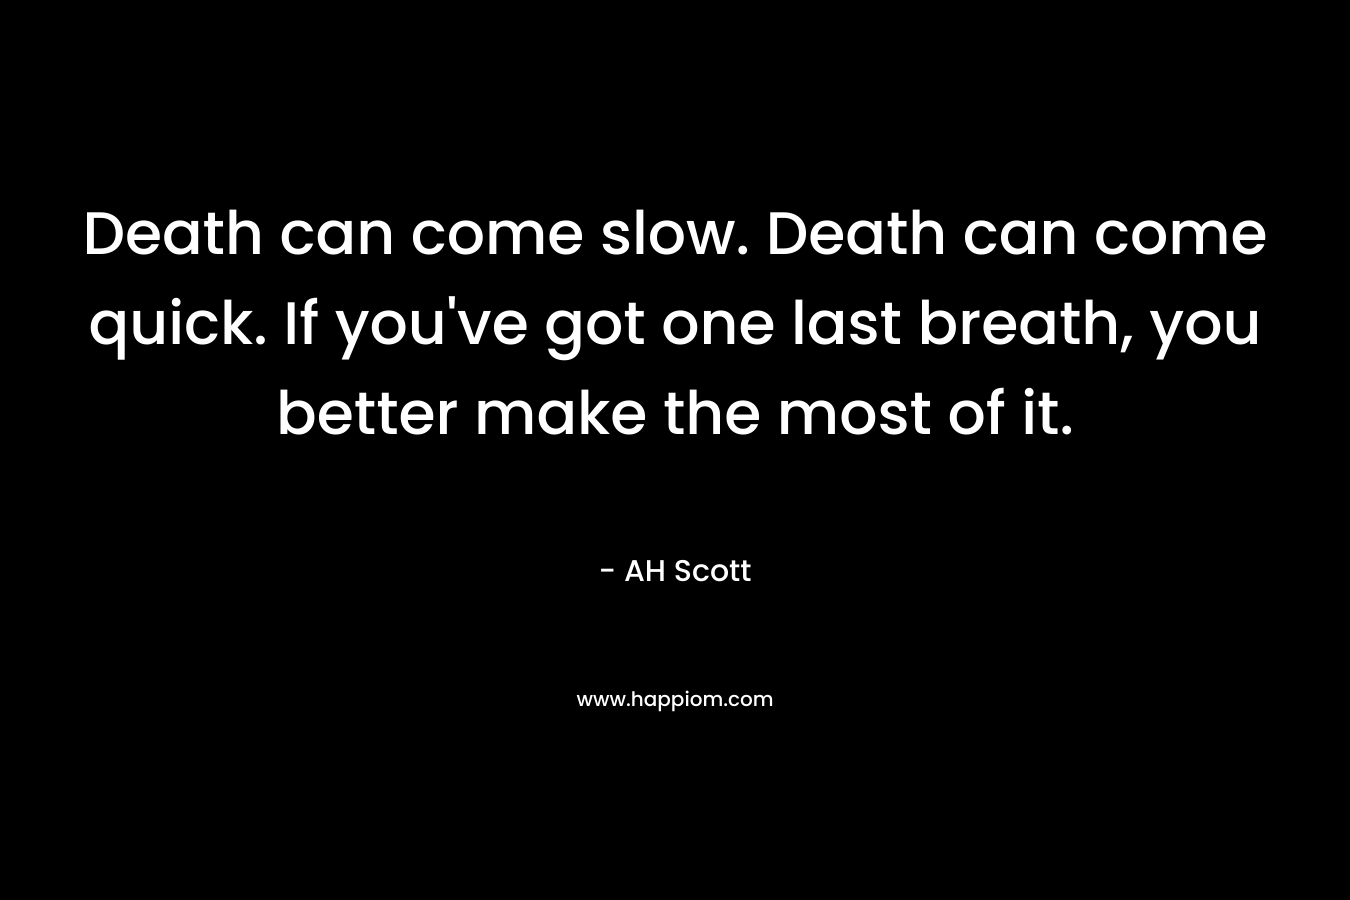 Death can come slow. Death can come quick. If you’ve got one last breath, you better make the most of it. – AH Scott